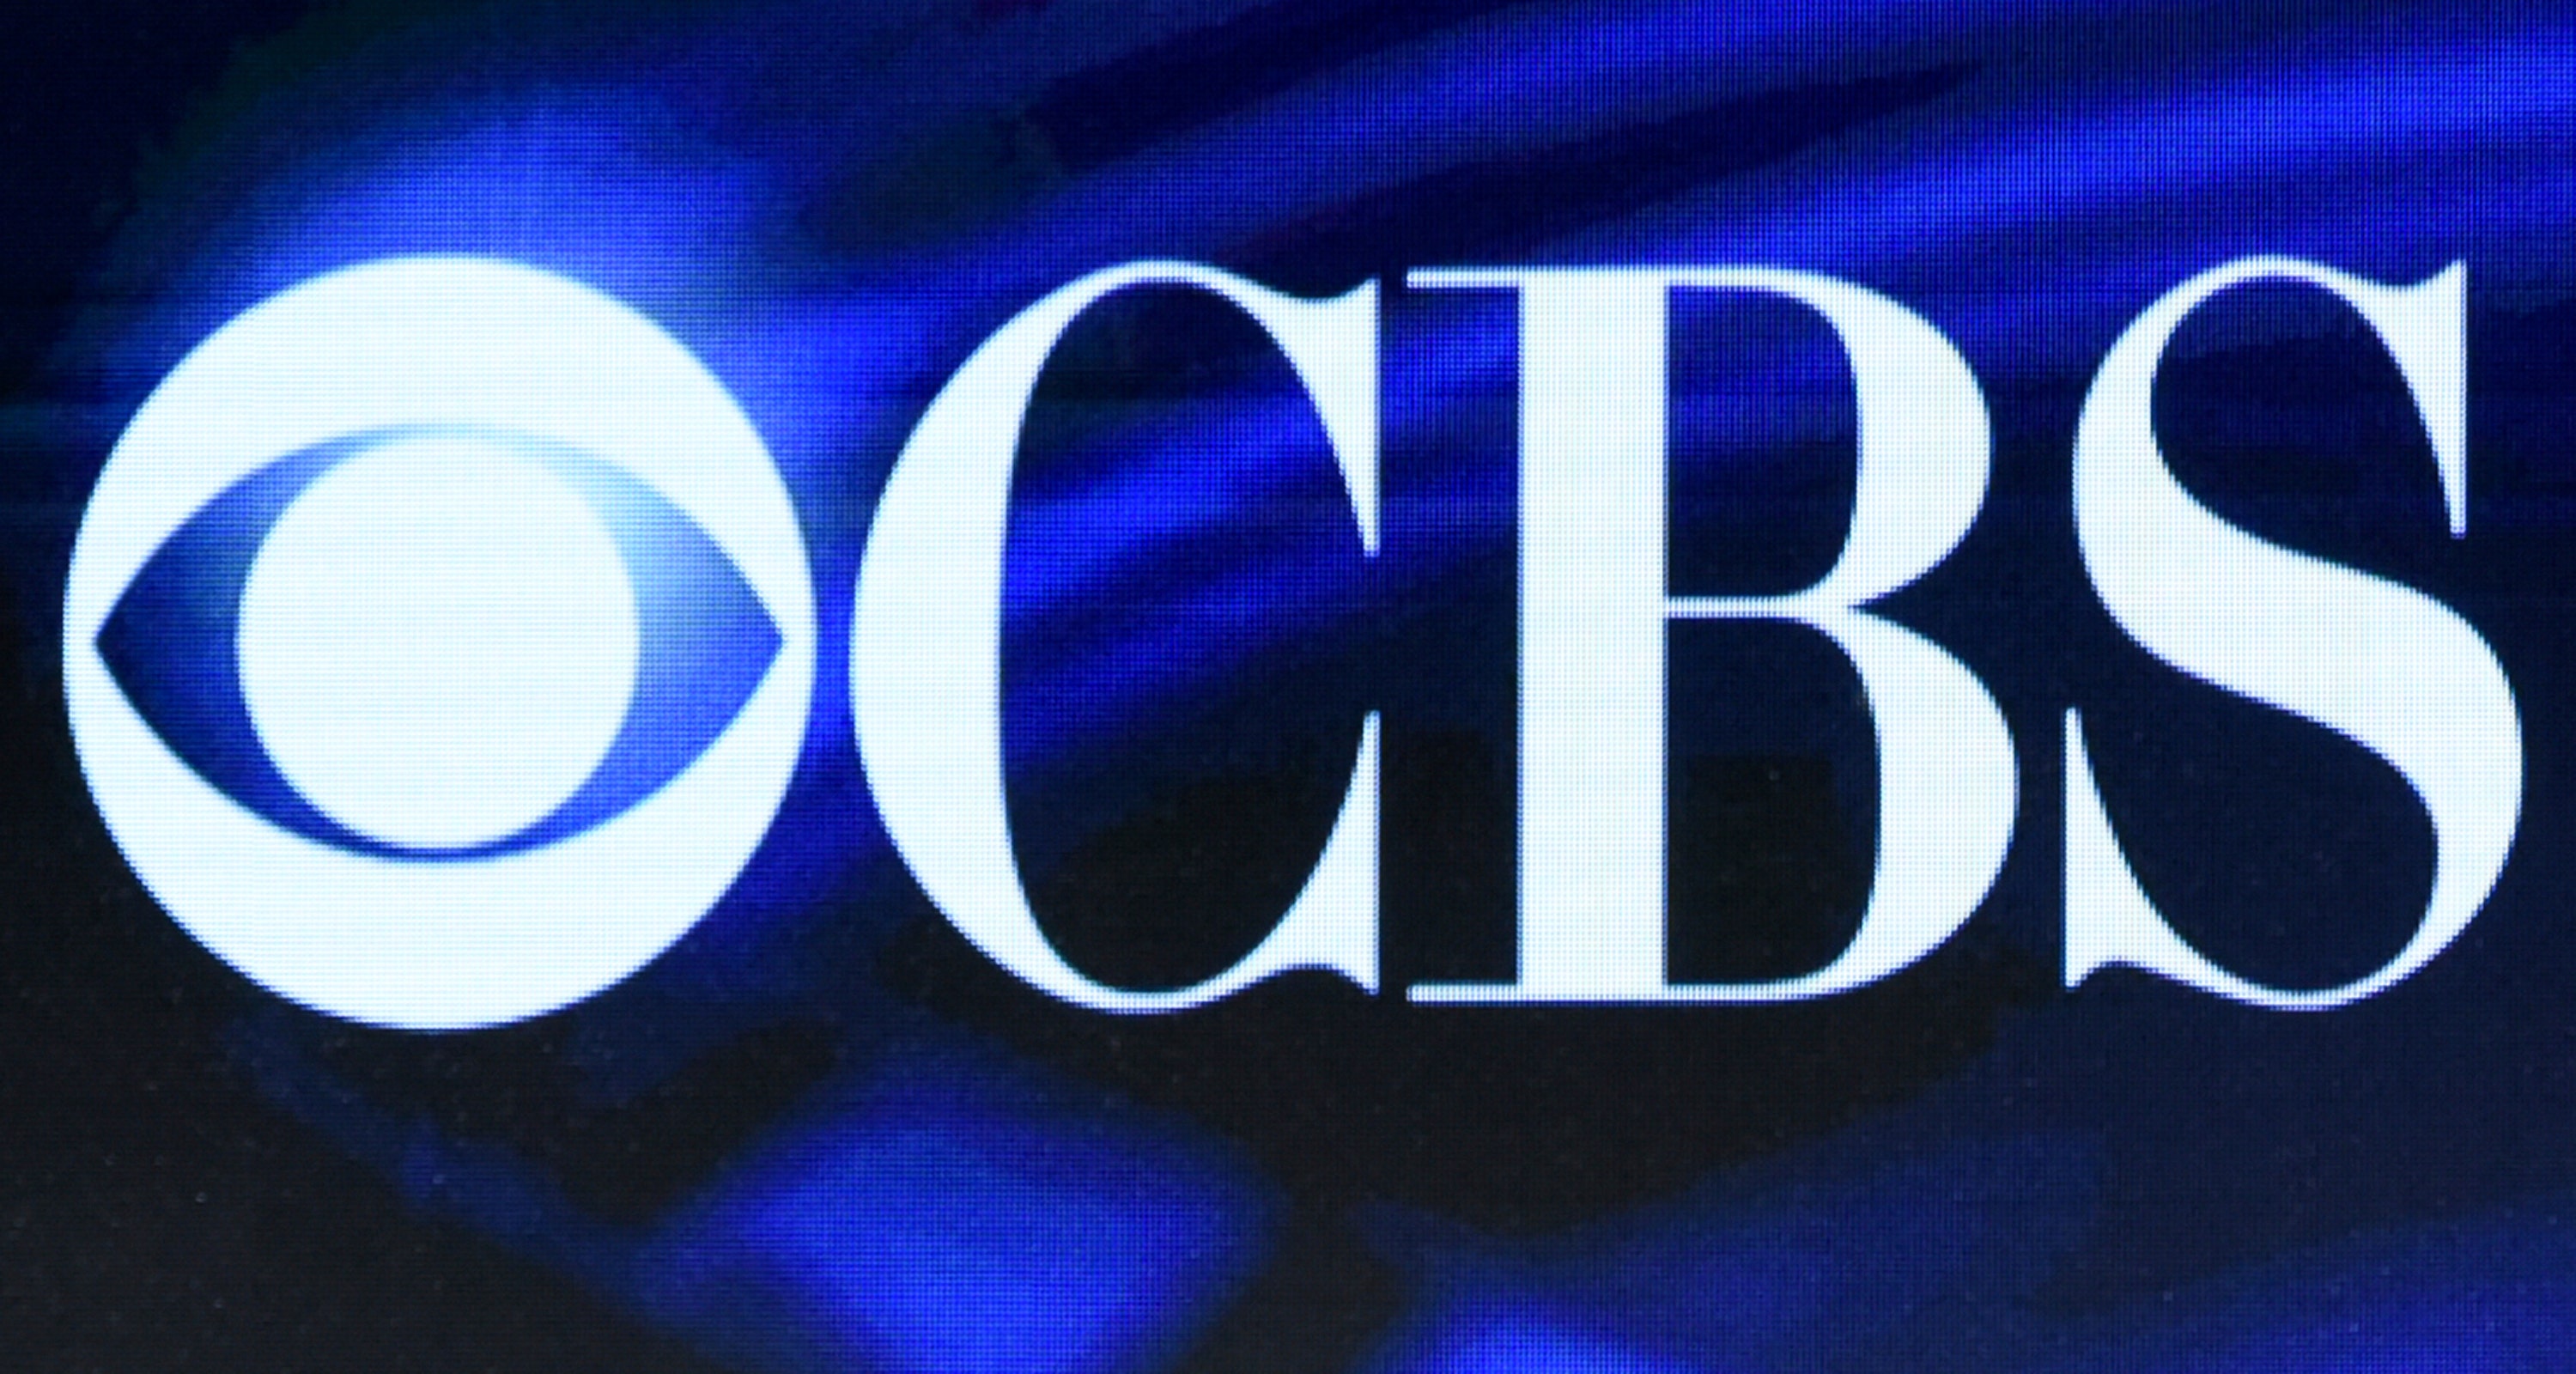 CBS, Disney, â€˜Criminal Mindsâ€™ producers sued by California over alleged sexual misconduct on showâ€™s set - Fox News